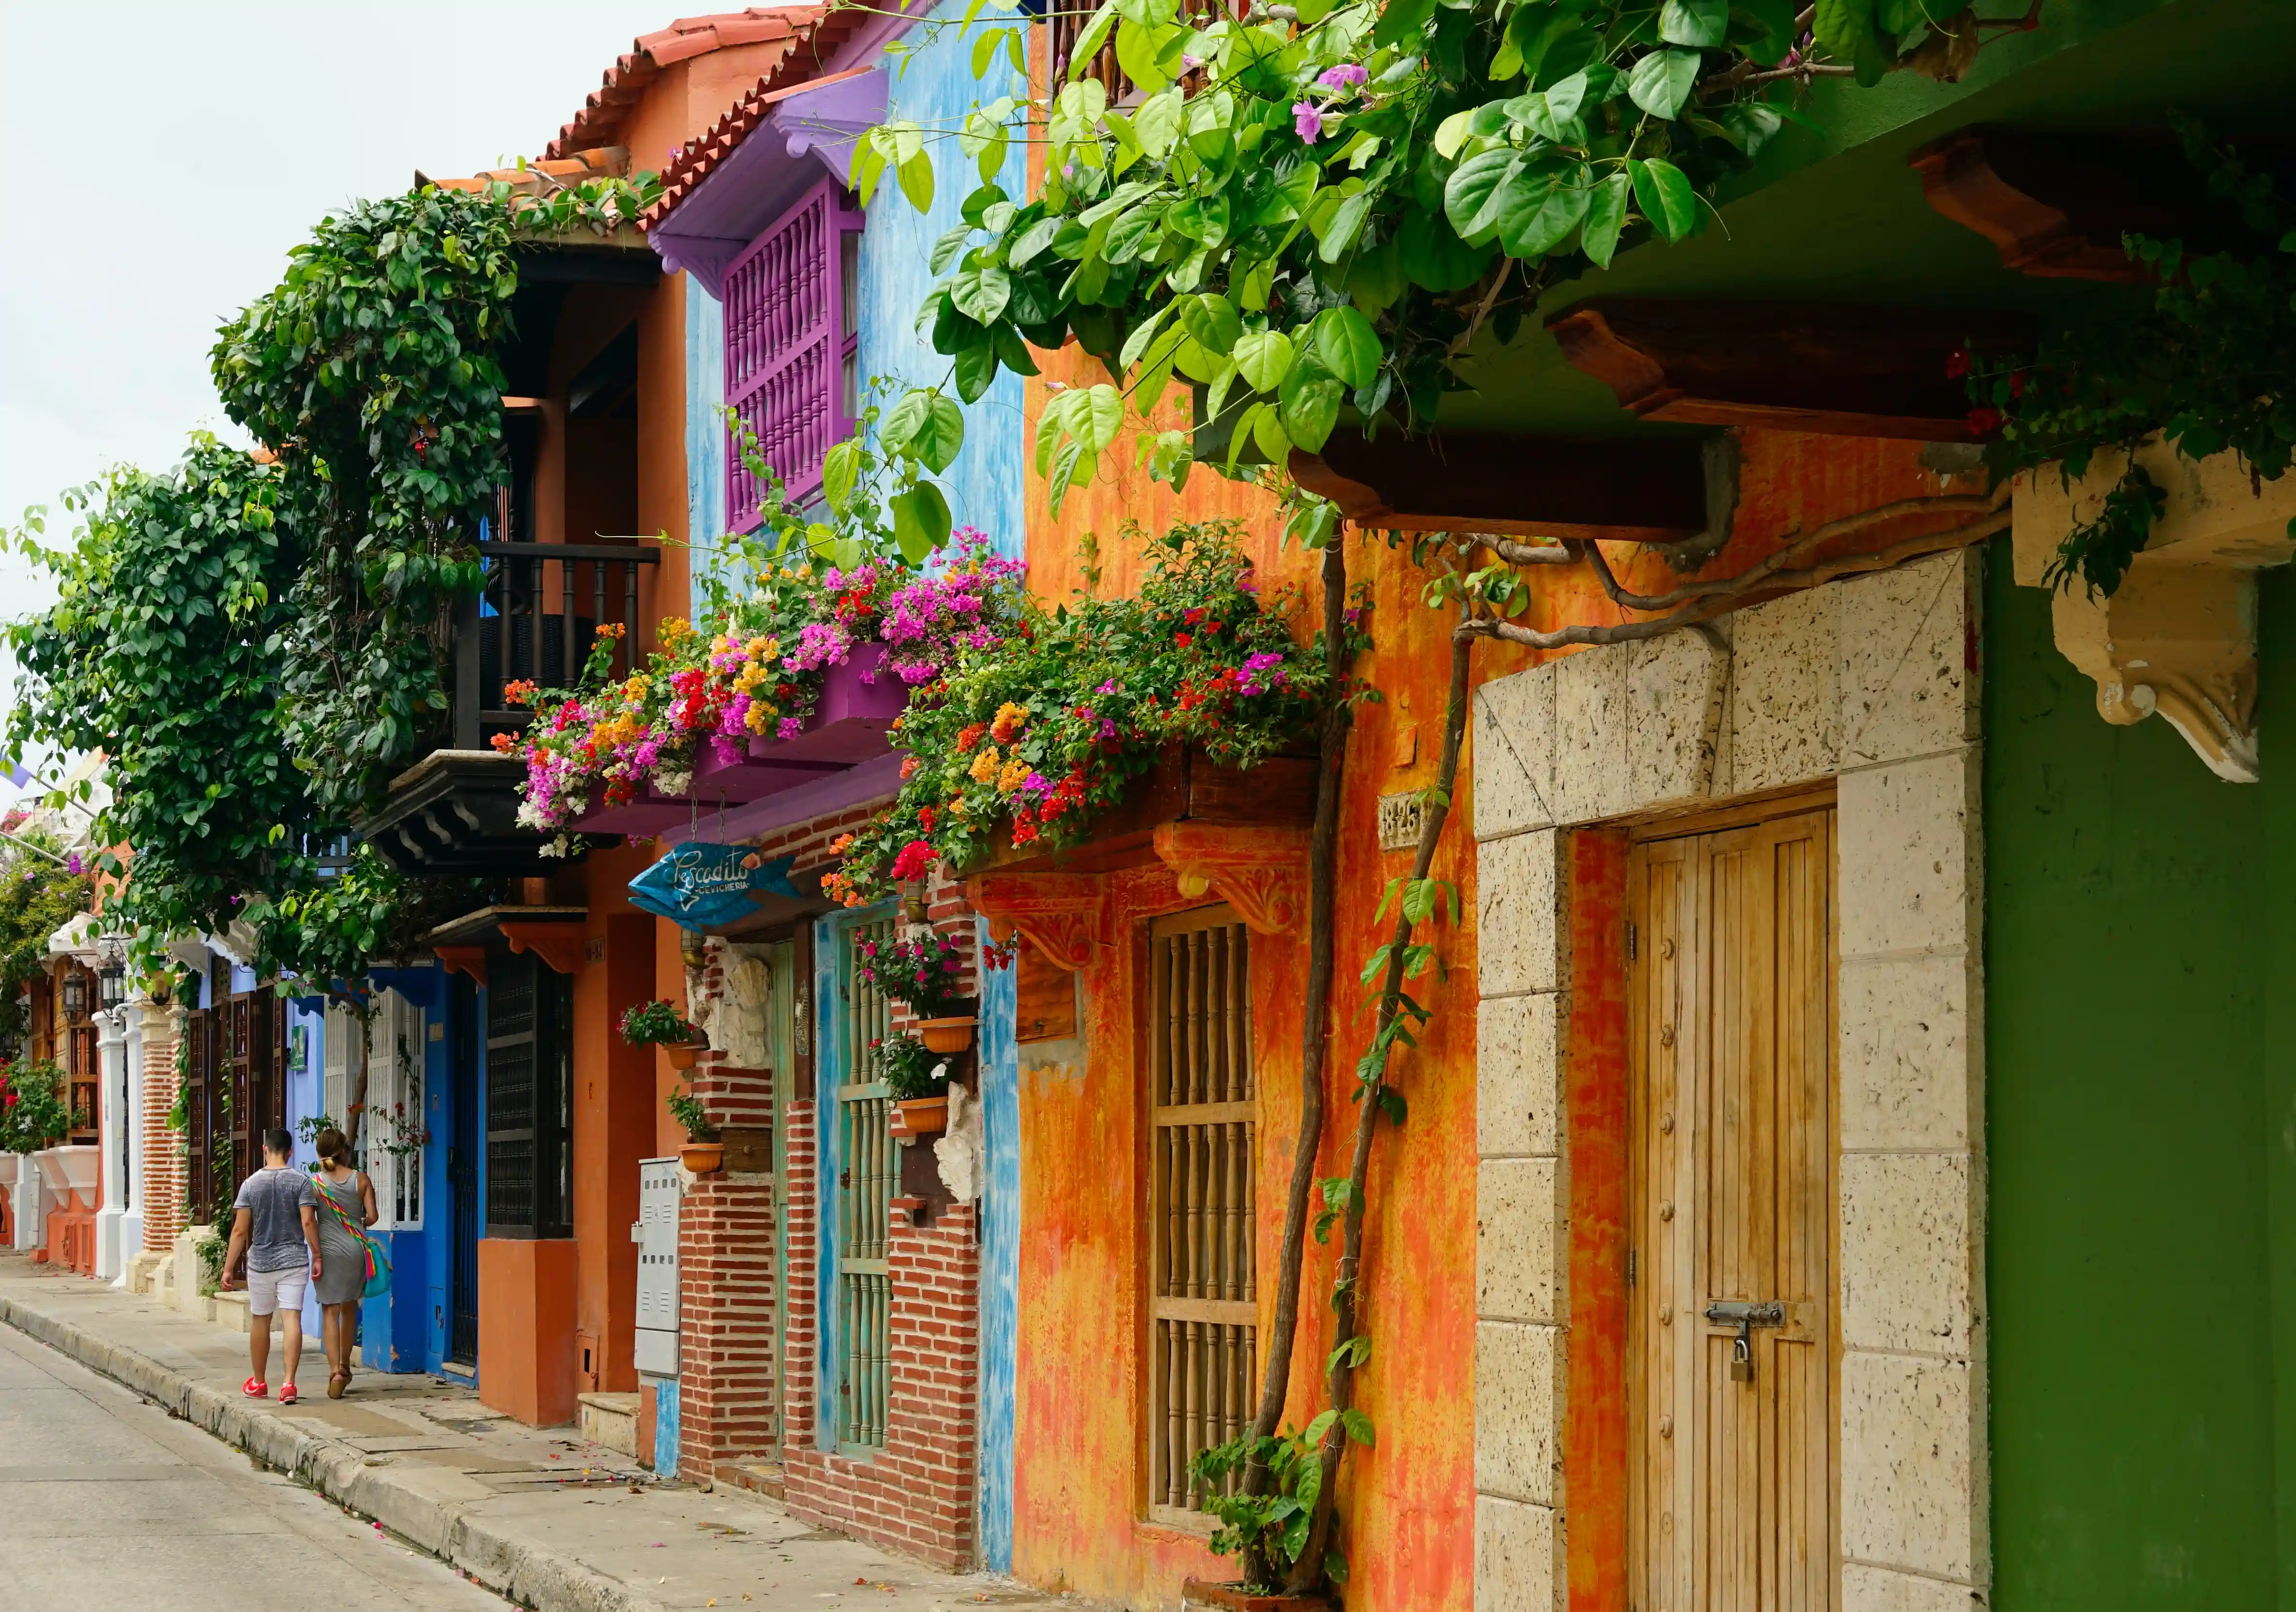 A street in Cali, Colombia, lined with diverse and colorful buildings with lush plants hanging from them.